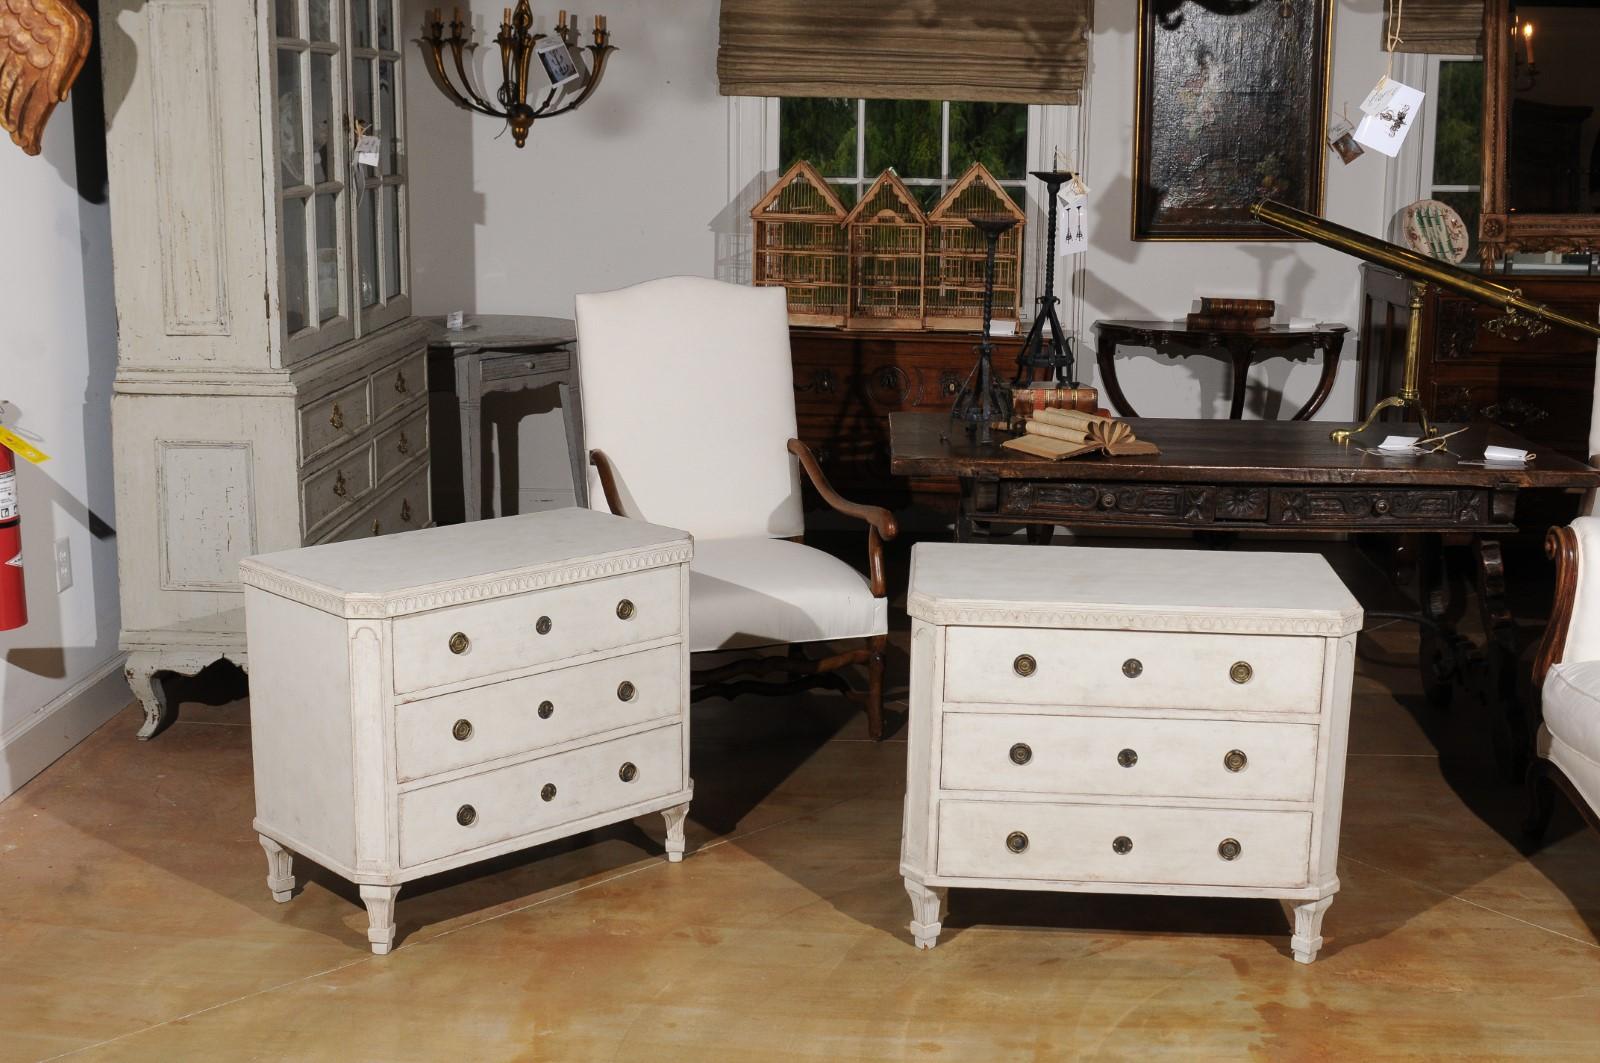 A pair of Swedish Gustavian style painted wood three-drawer commodes from the late 19th century, with canted side posts and tapered feet. Born in Sweden during the later years of the 19th century, each of this pair of painted chests features a